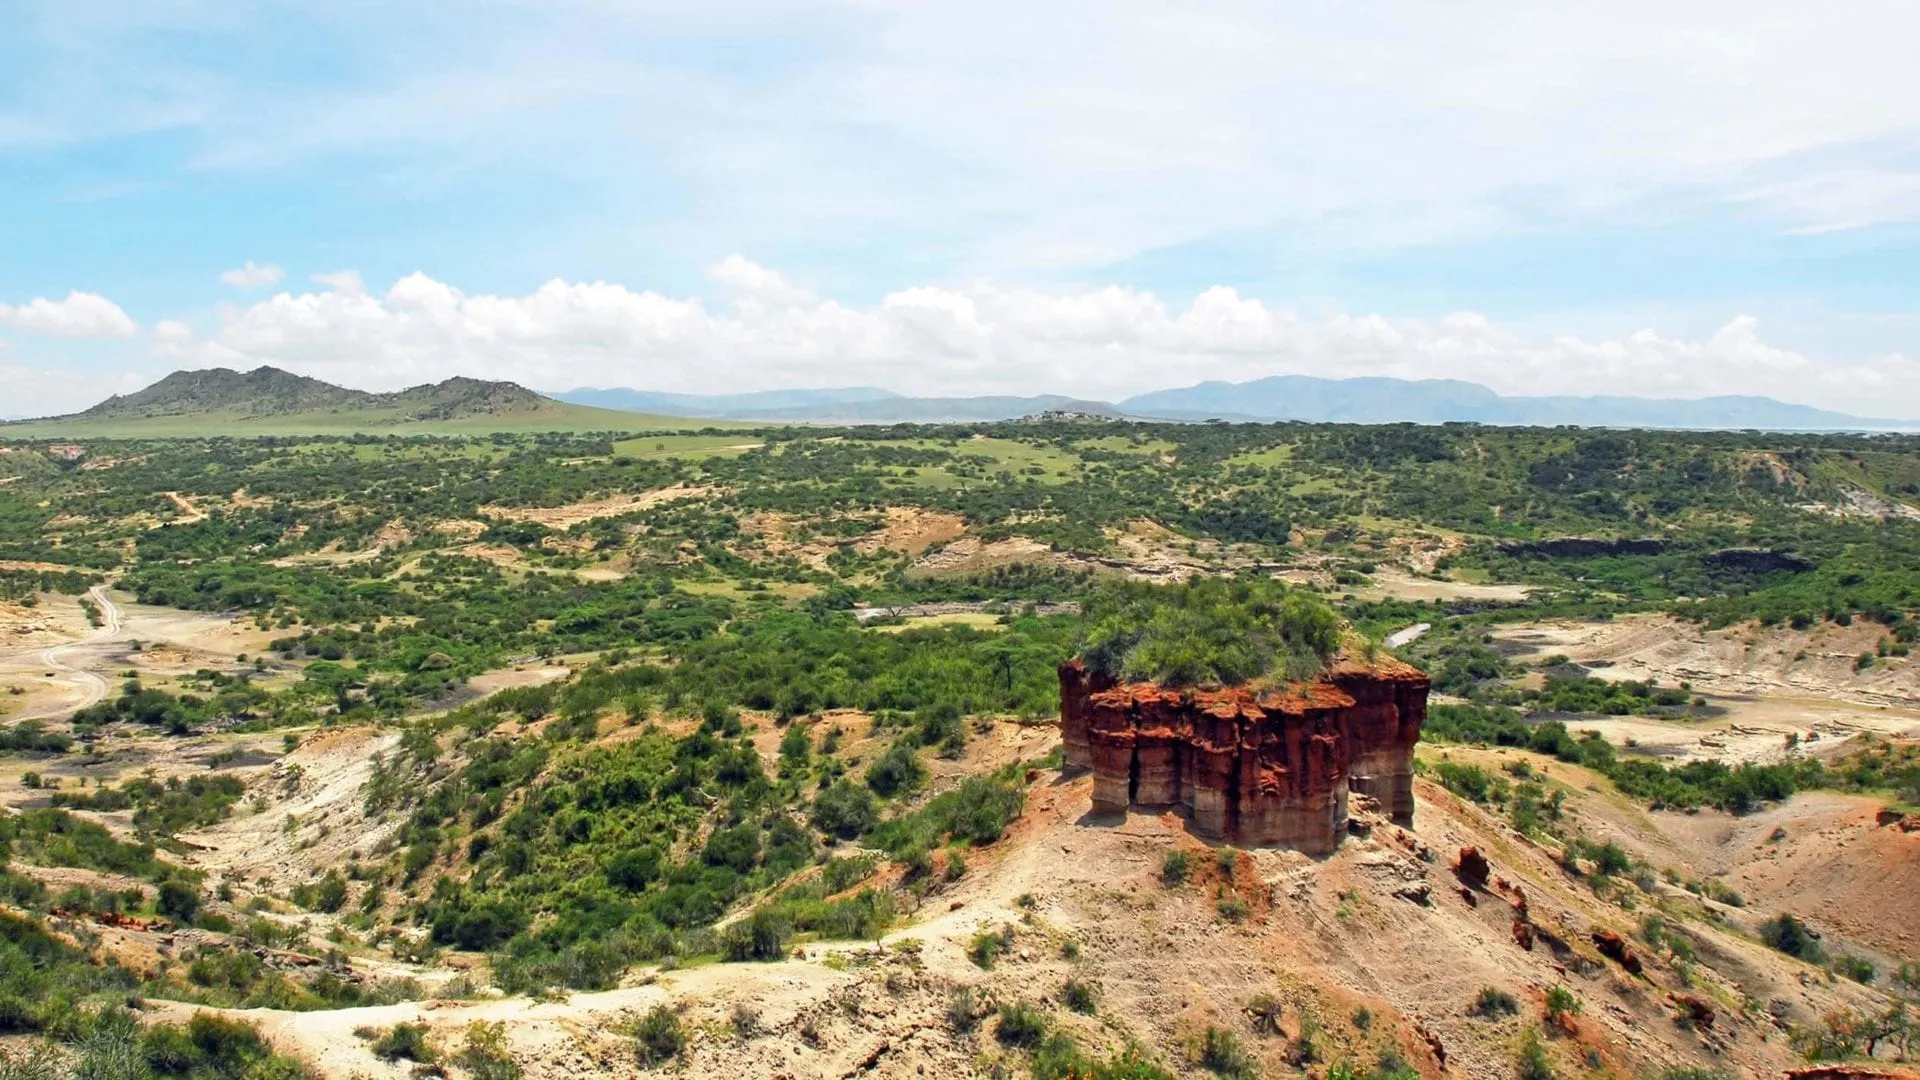 Olduvai Gorge in Tanzania, Africa | Museums,Excavations - Rated 3.7